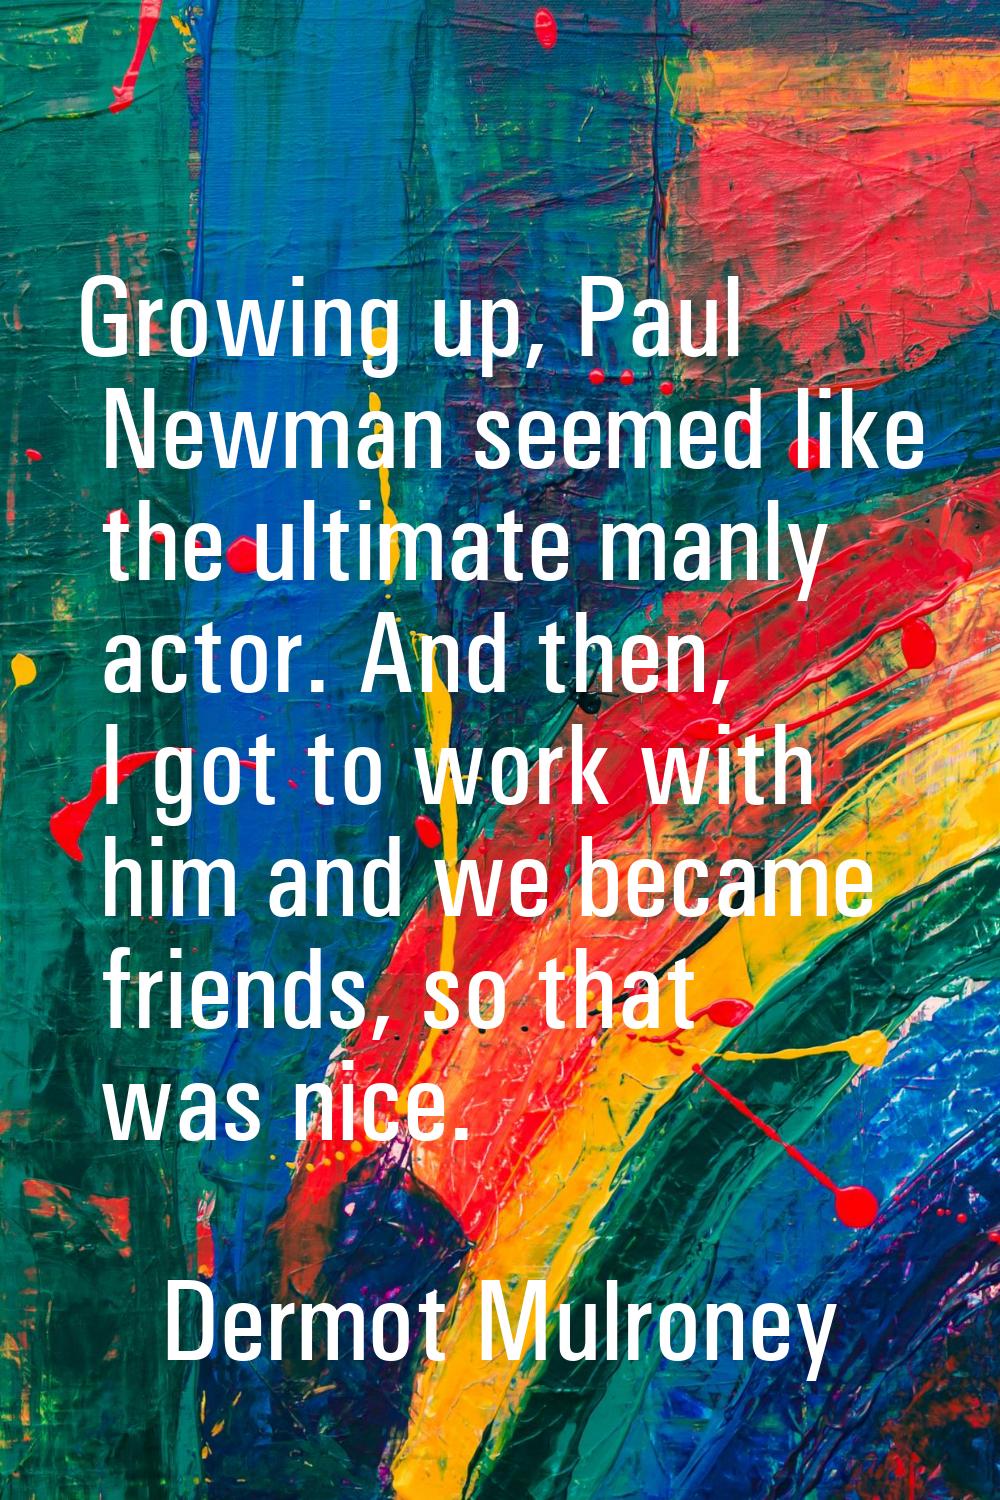 Growing up, Paul Newman seemed like the ultimate manly actor. And then, I got to work with him and 